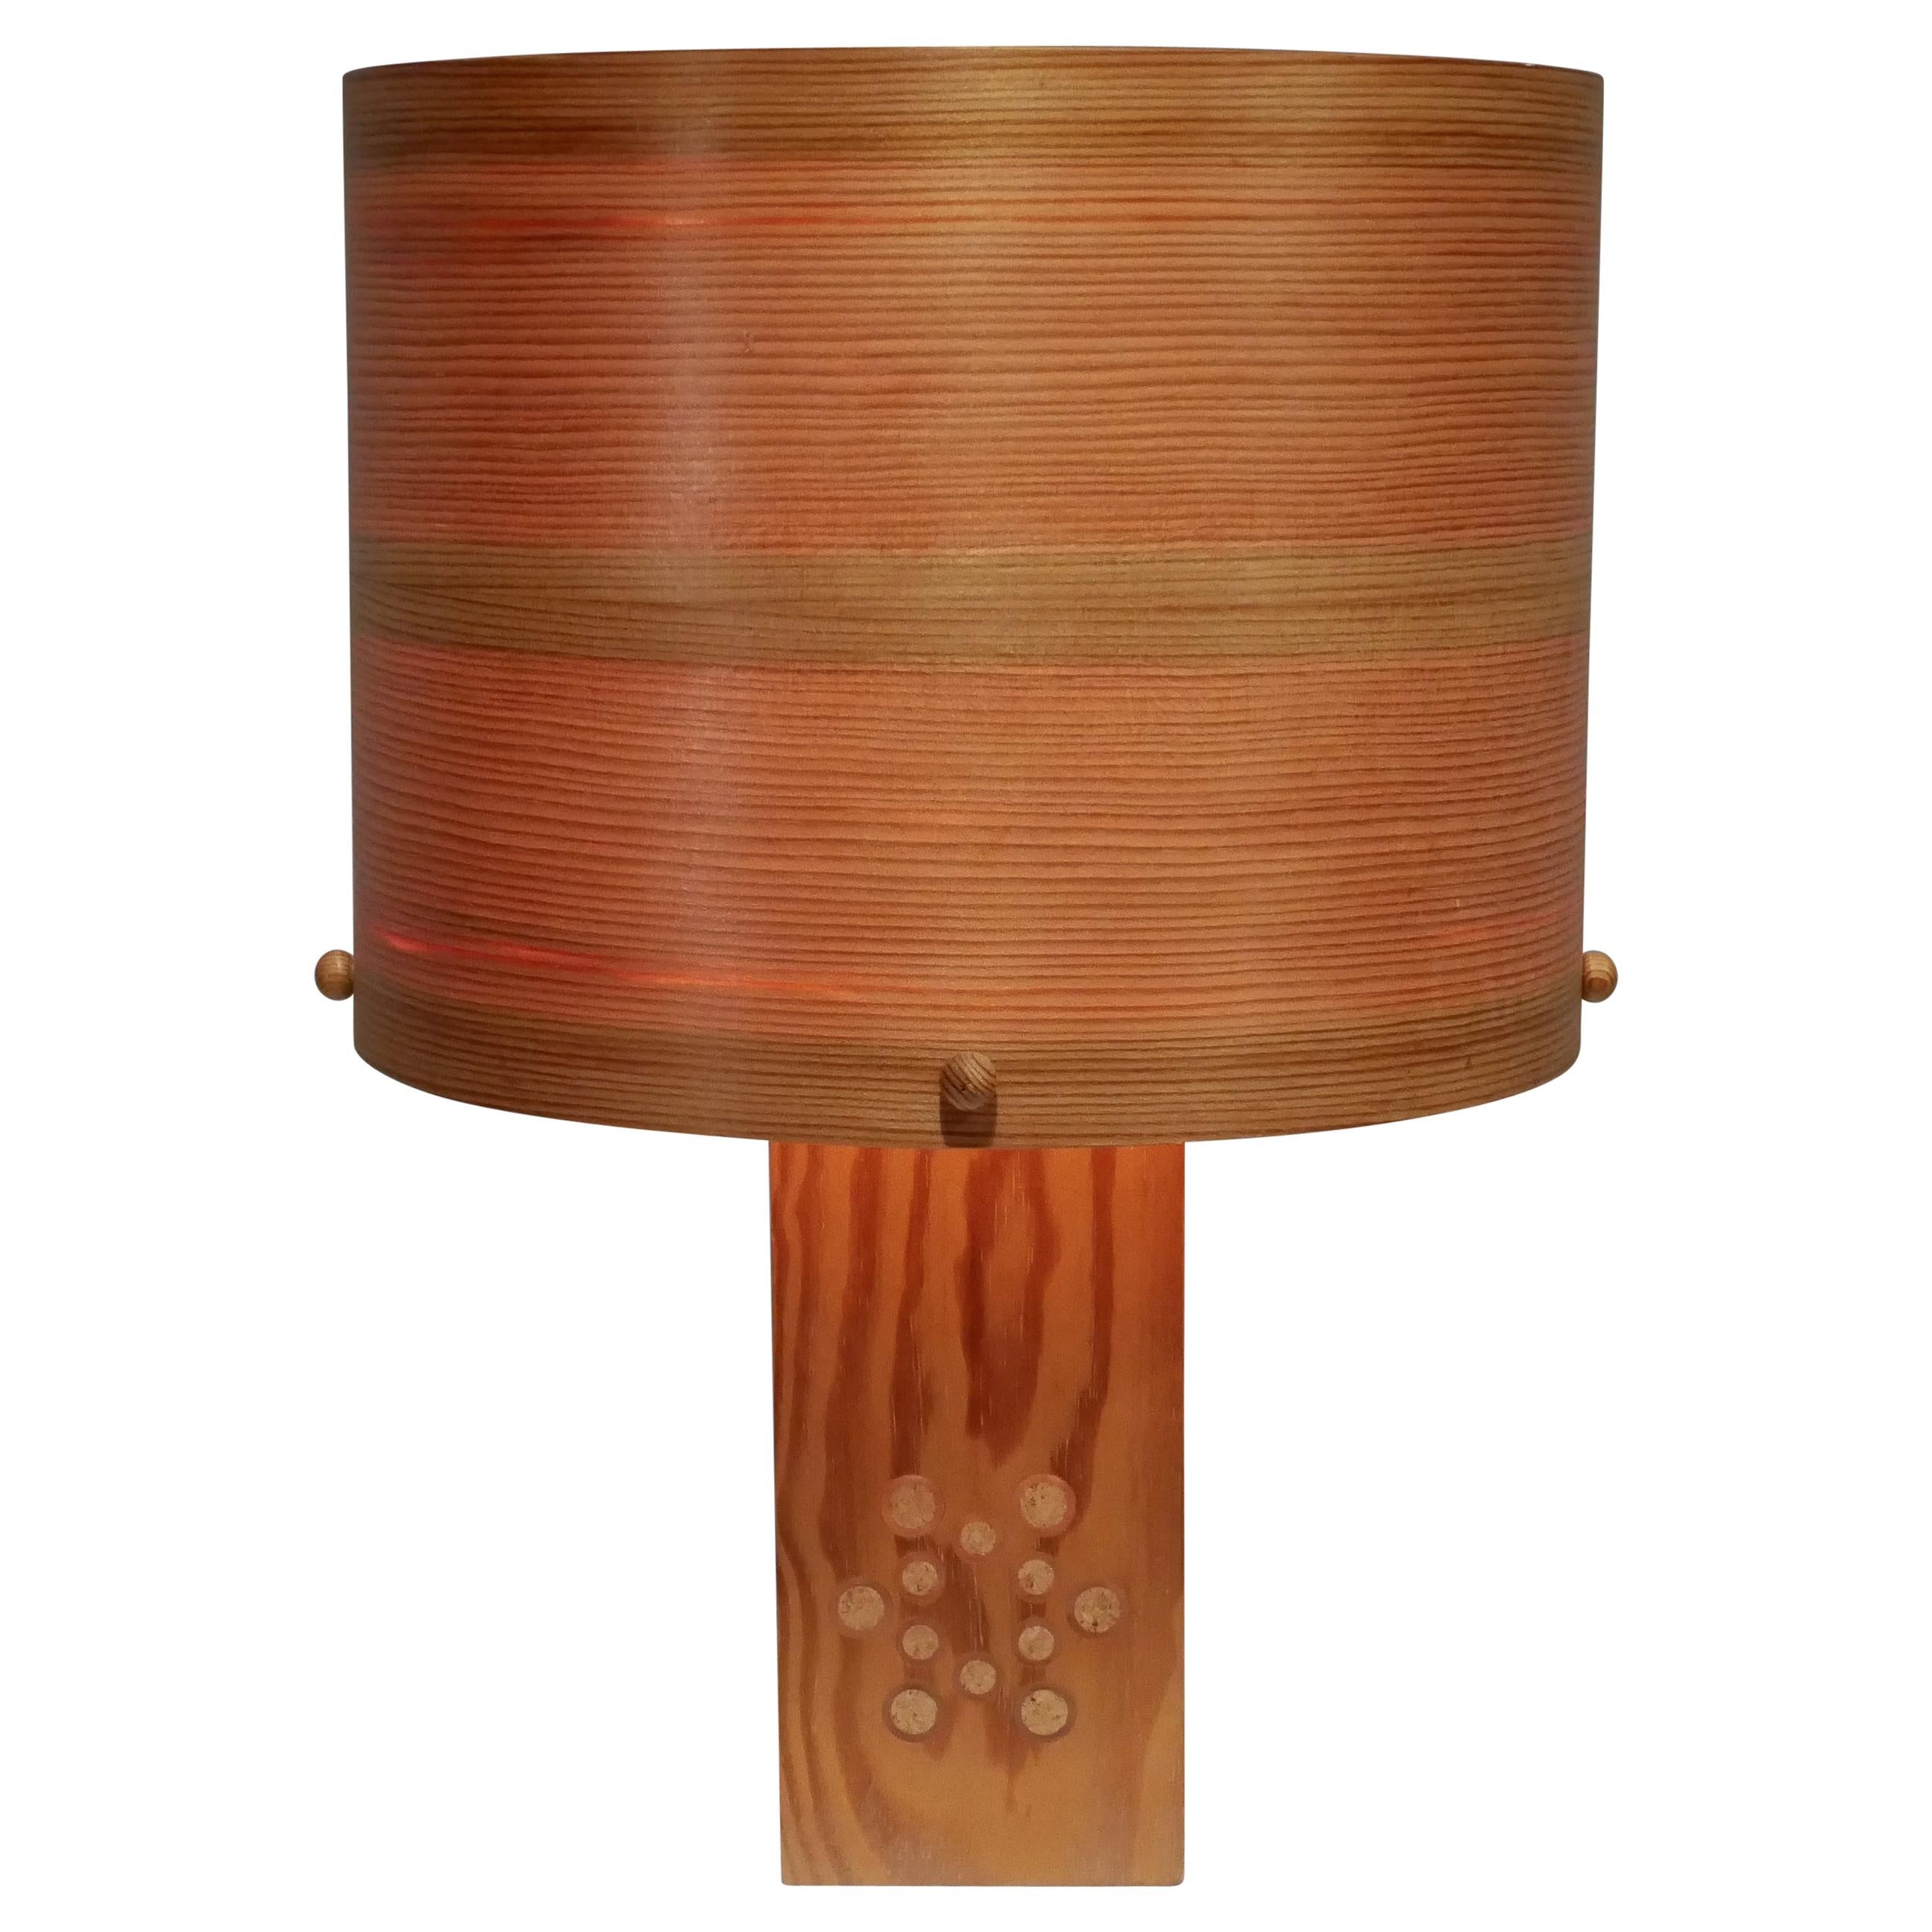 Table Lamp in Solid Pine from the Swedish Company Pileprodukter, 1970s For Sale